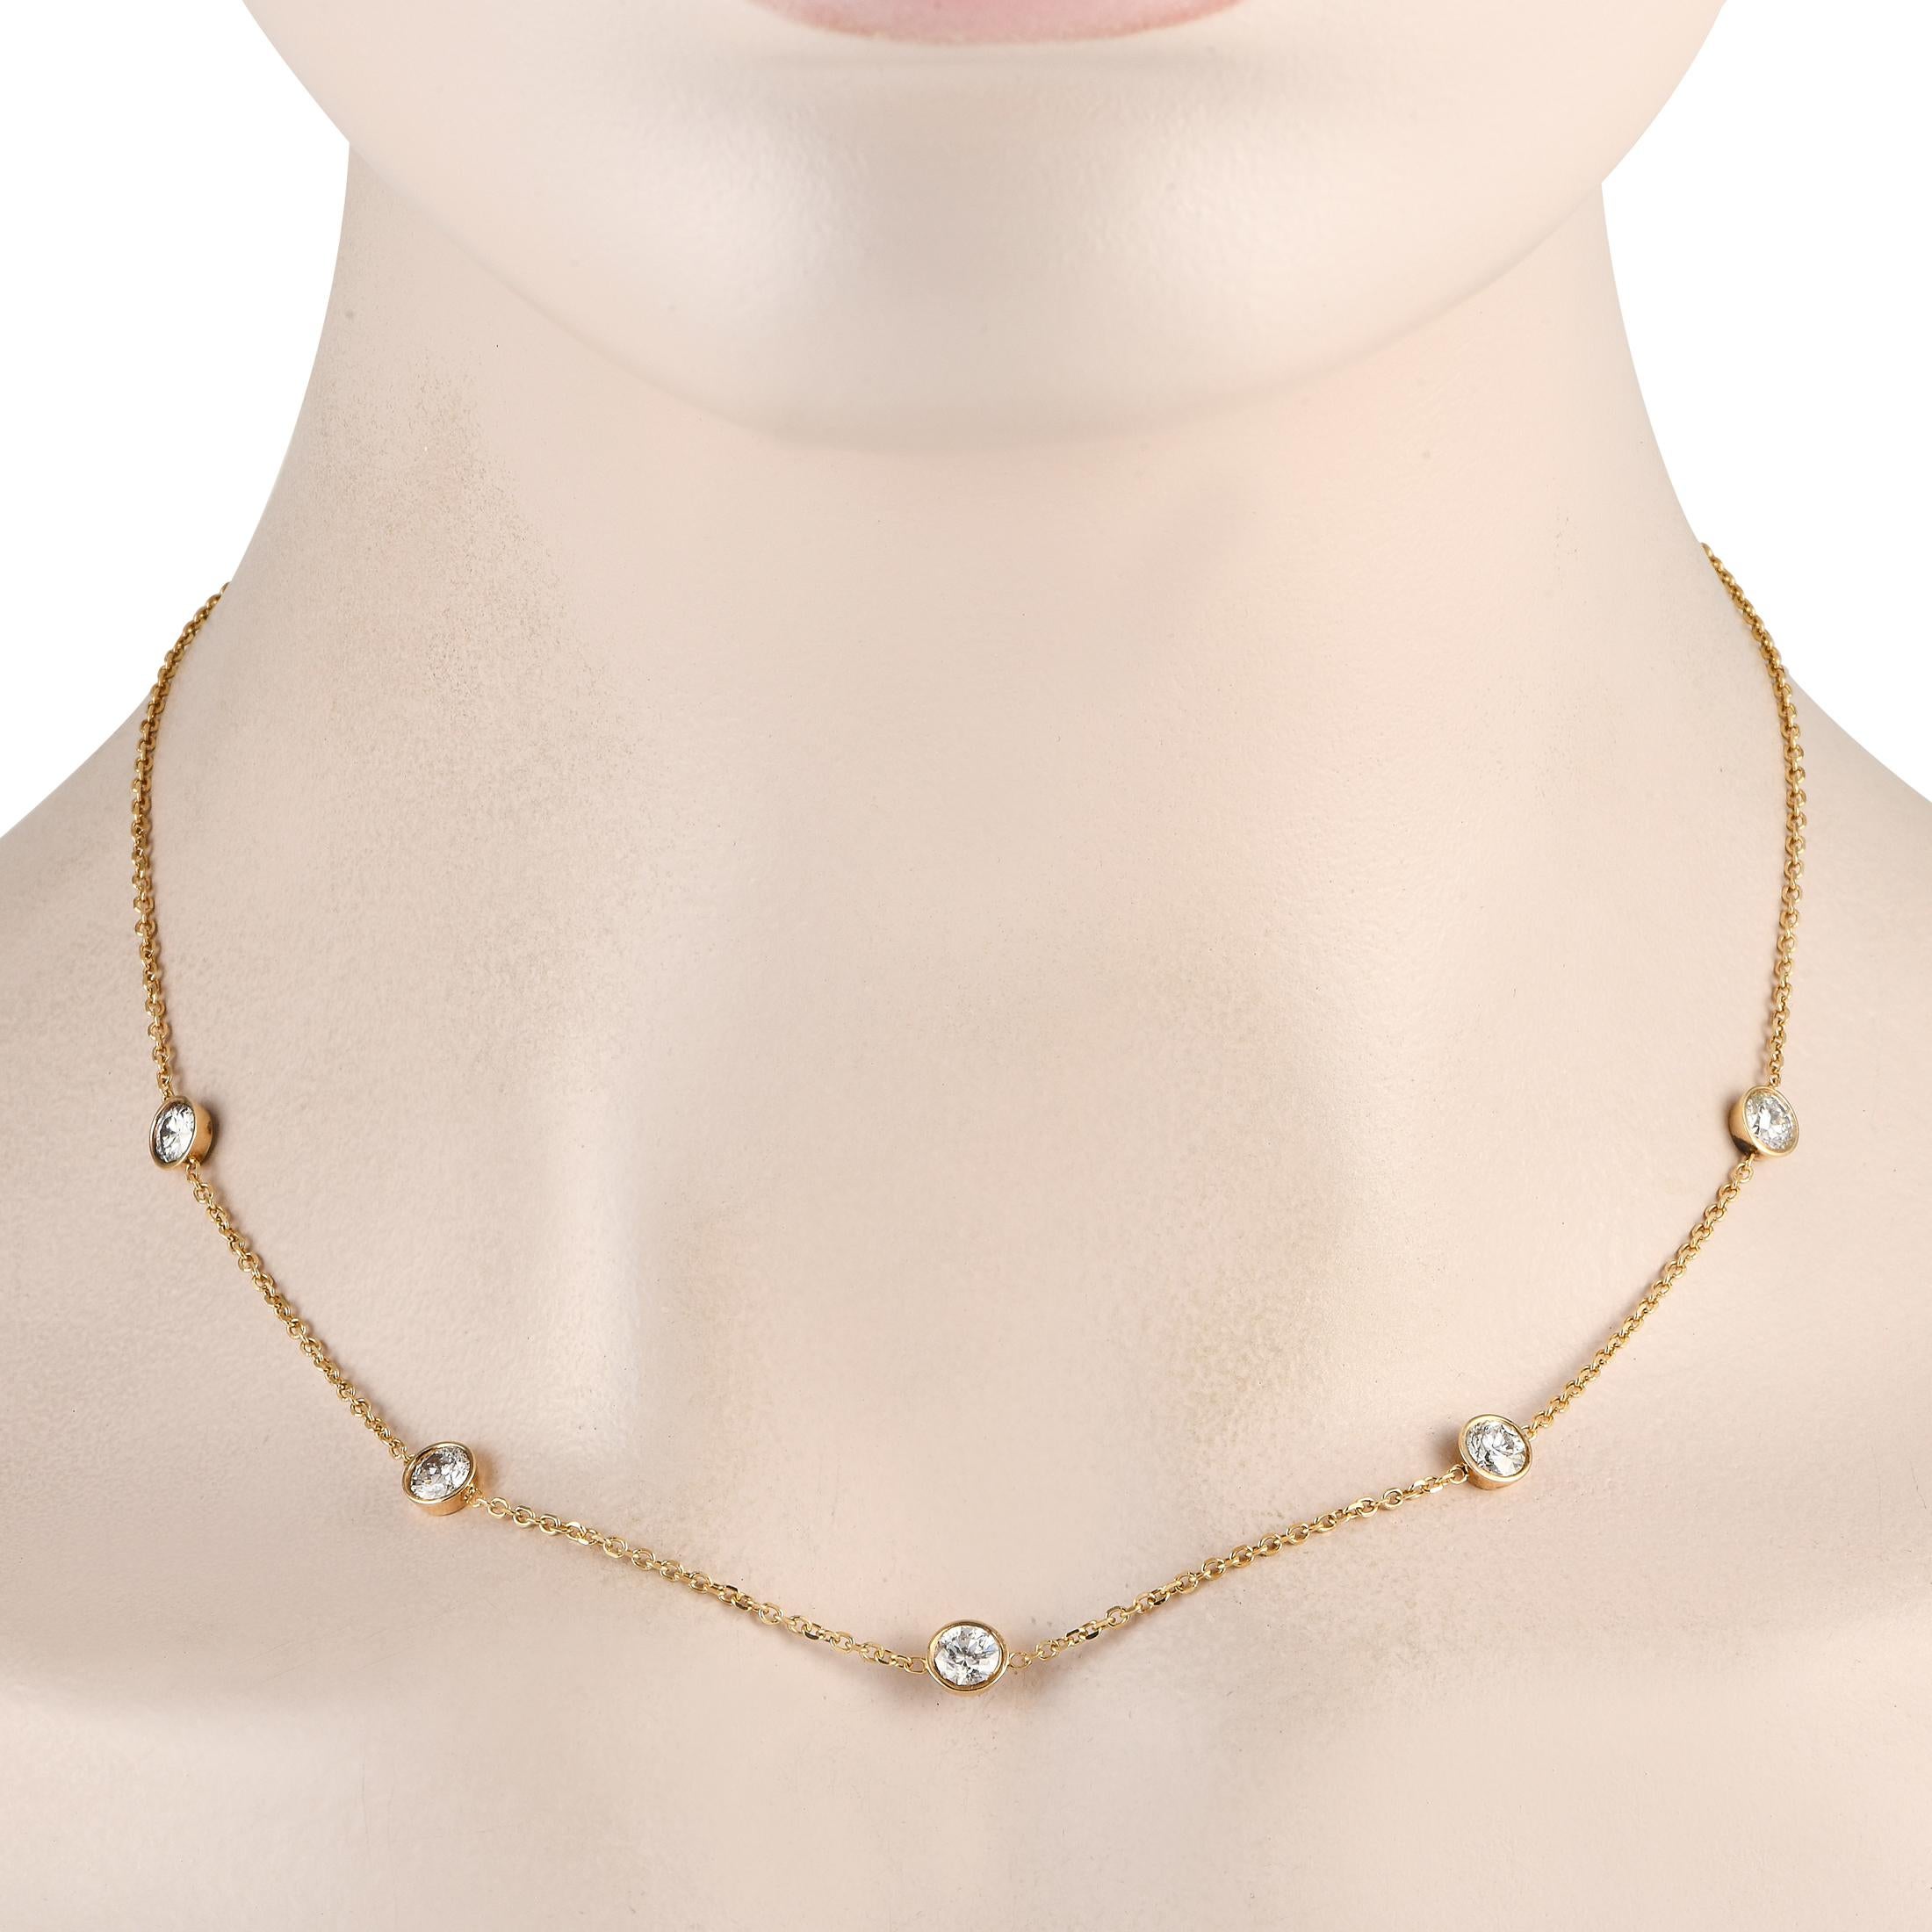 This antique diamond station necklace is ready to dot your neckline with just the right amount of sparkle. An piece, this jewel features a 17.5-long chain in 18K yellow gold. Set at evenly spaced stations are five round brilliant diamonds secured in